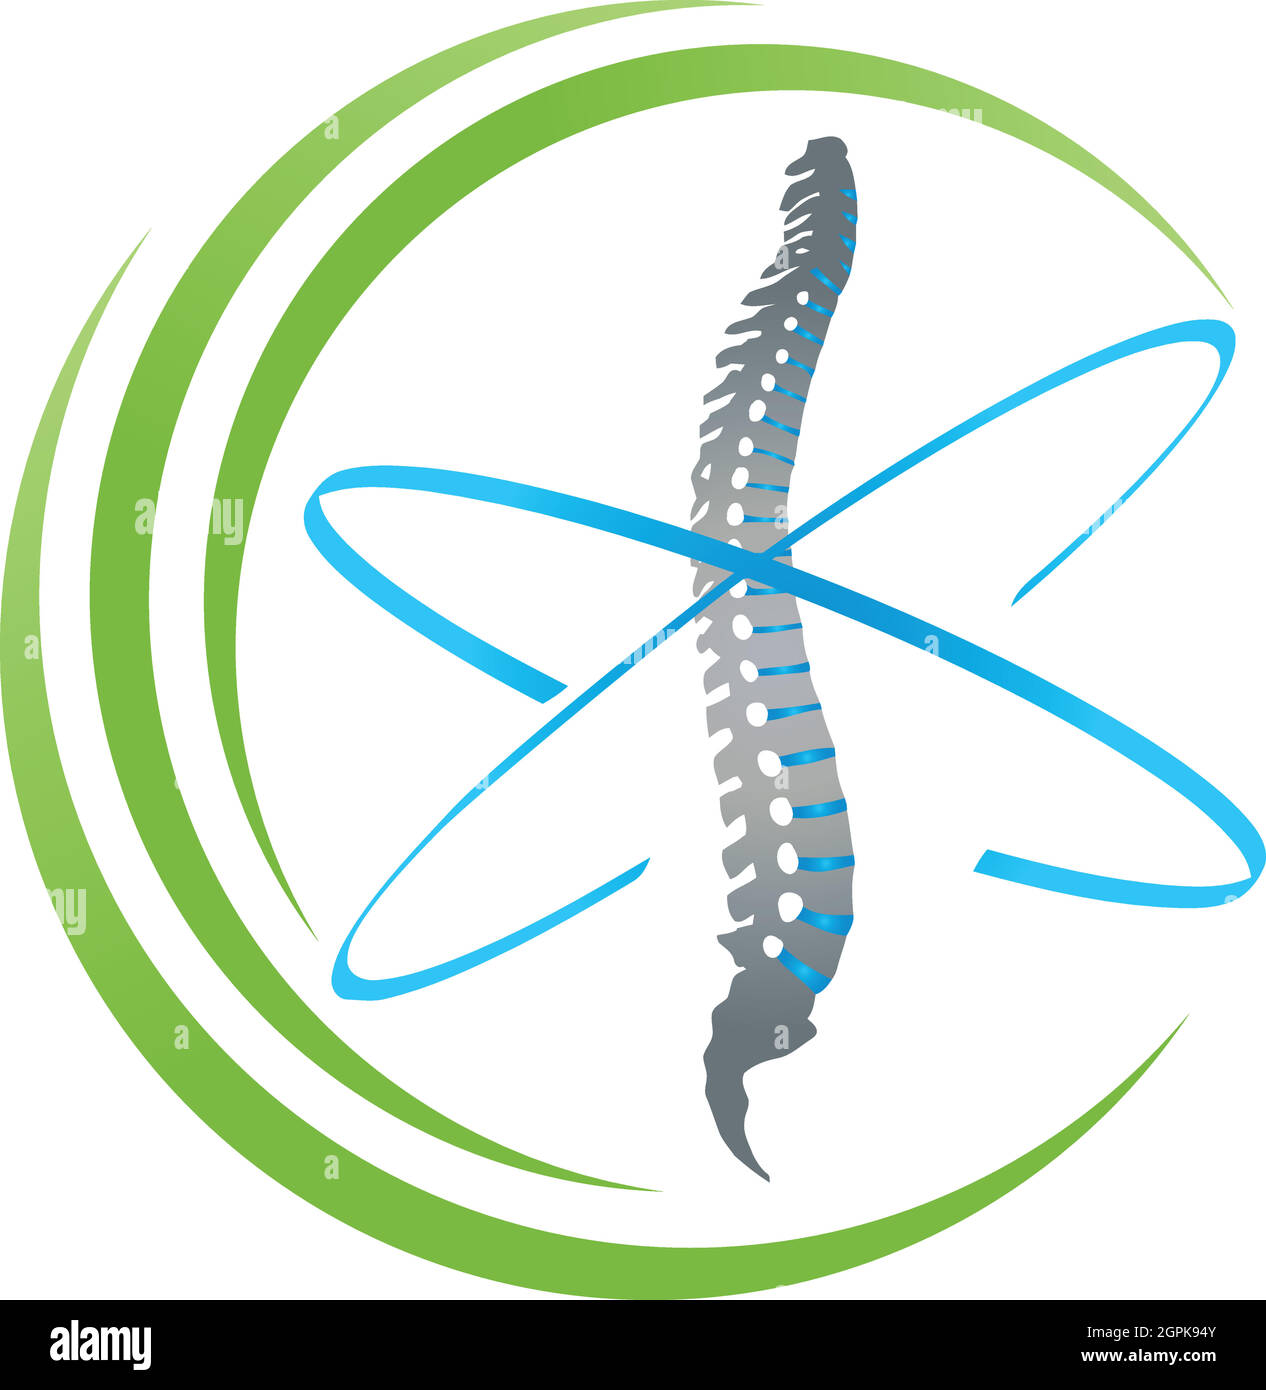 Herniated disc Stock Vector Images - Alamy